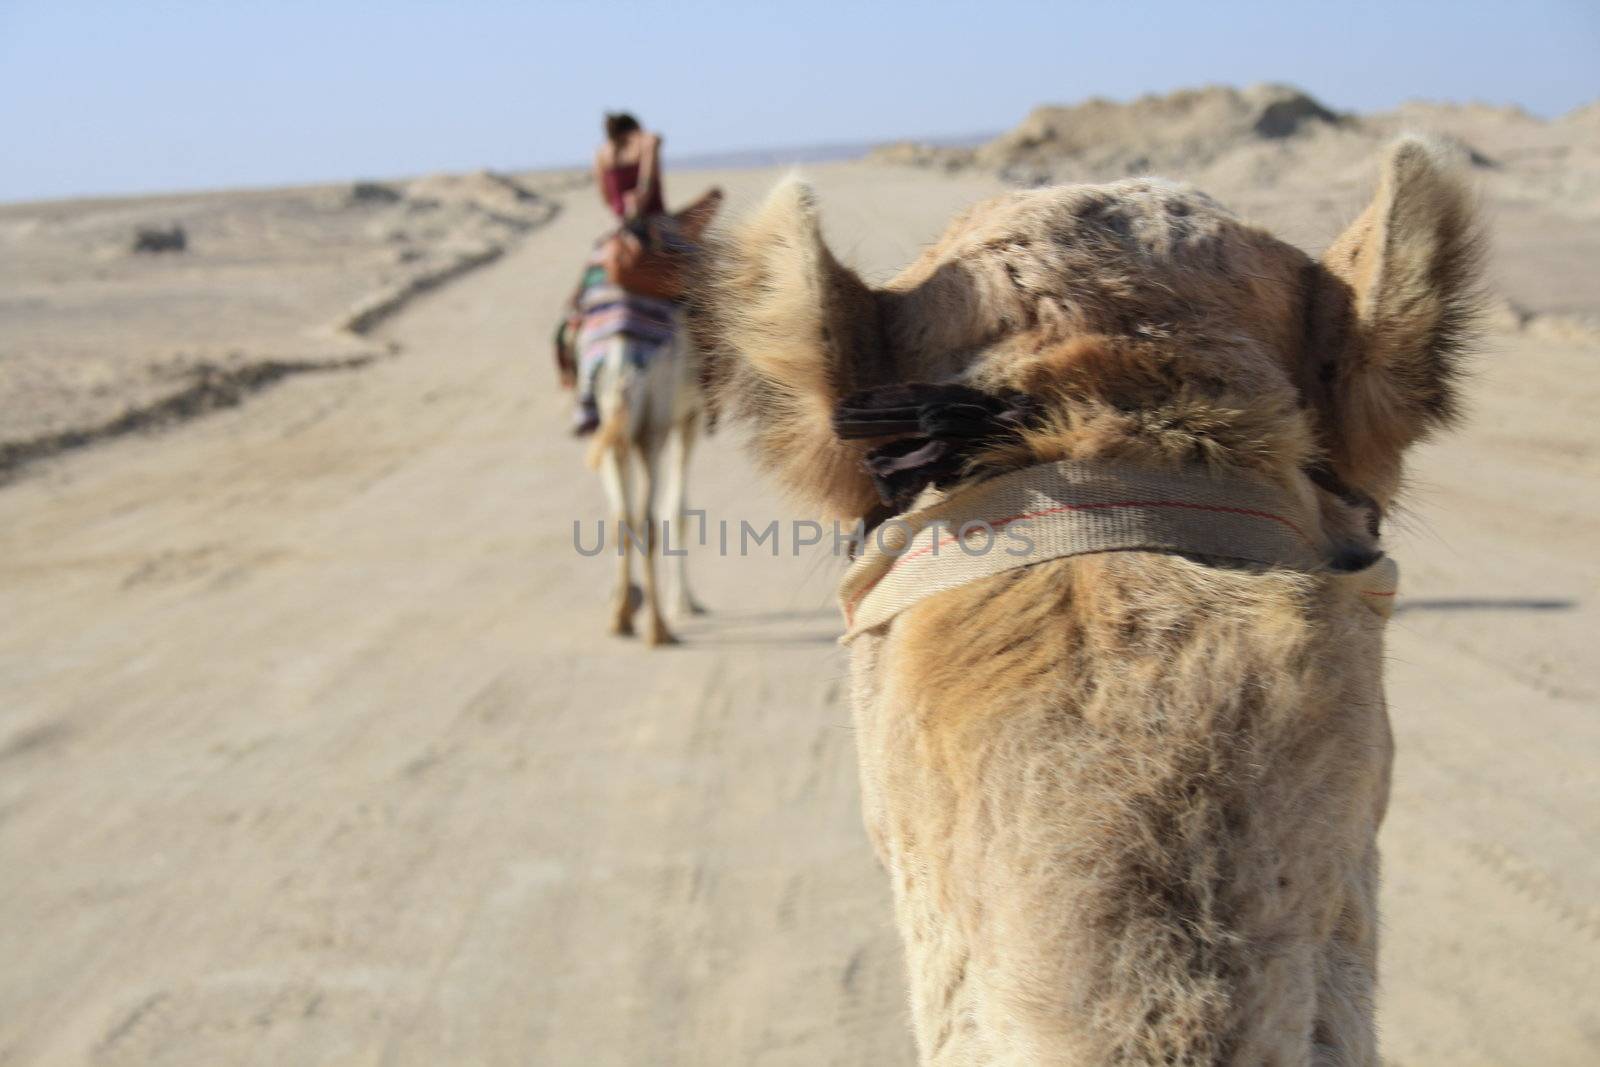 sit on the camel by photochecker